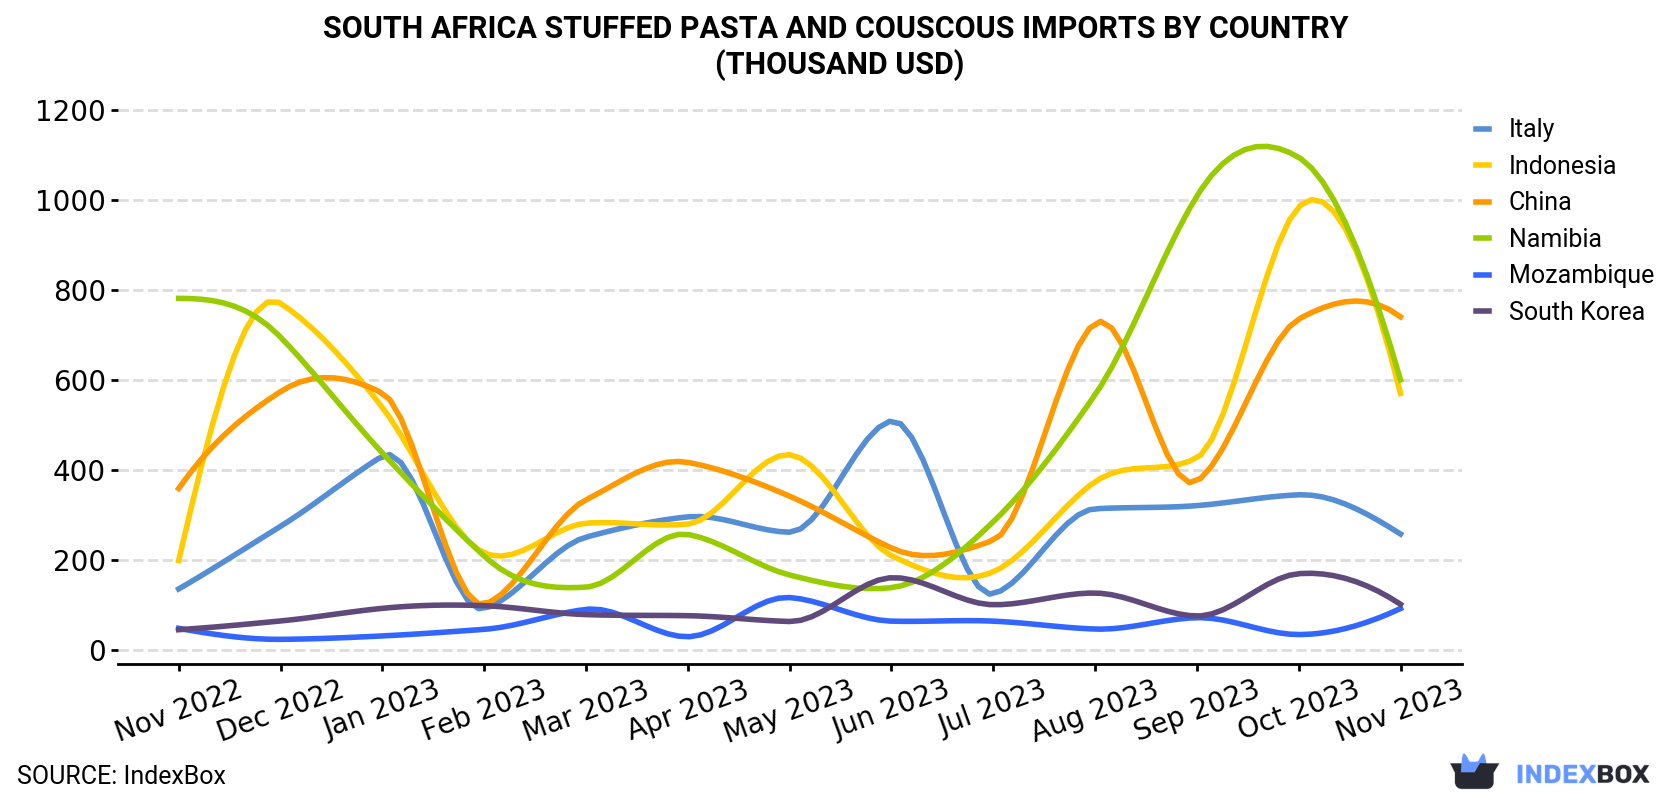 South Africa Stuffed Pasta and Couscous Imports By Country (Thousand USD)